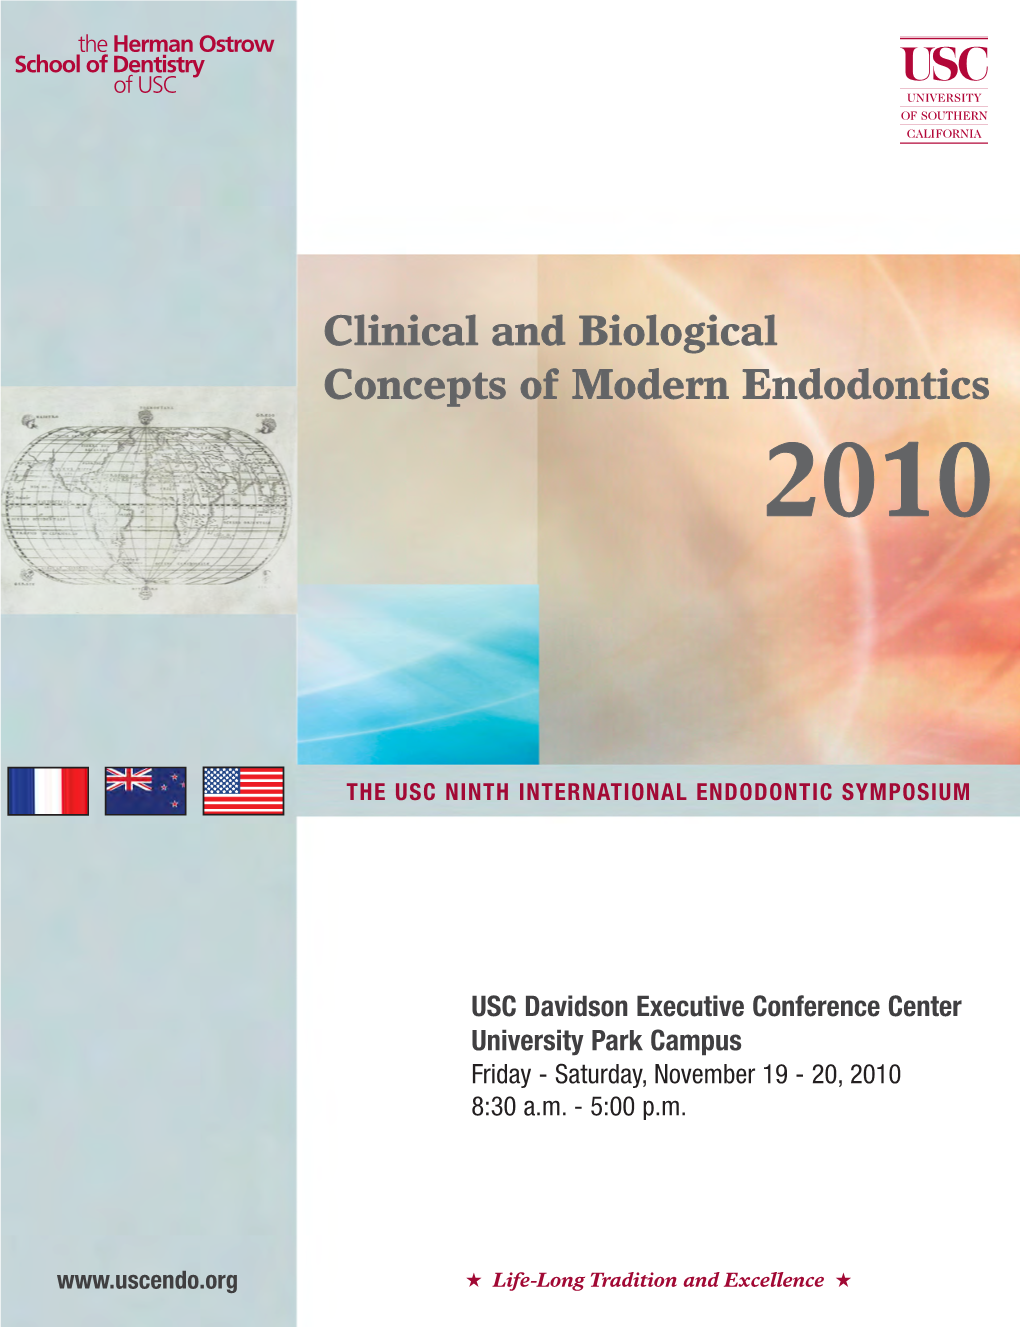 Clinical and Biological Concepts of Modern Endodontics 2010